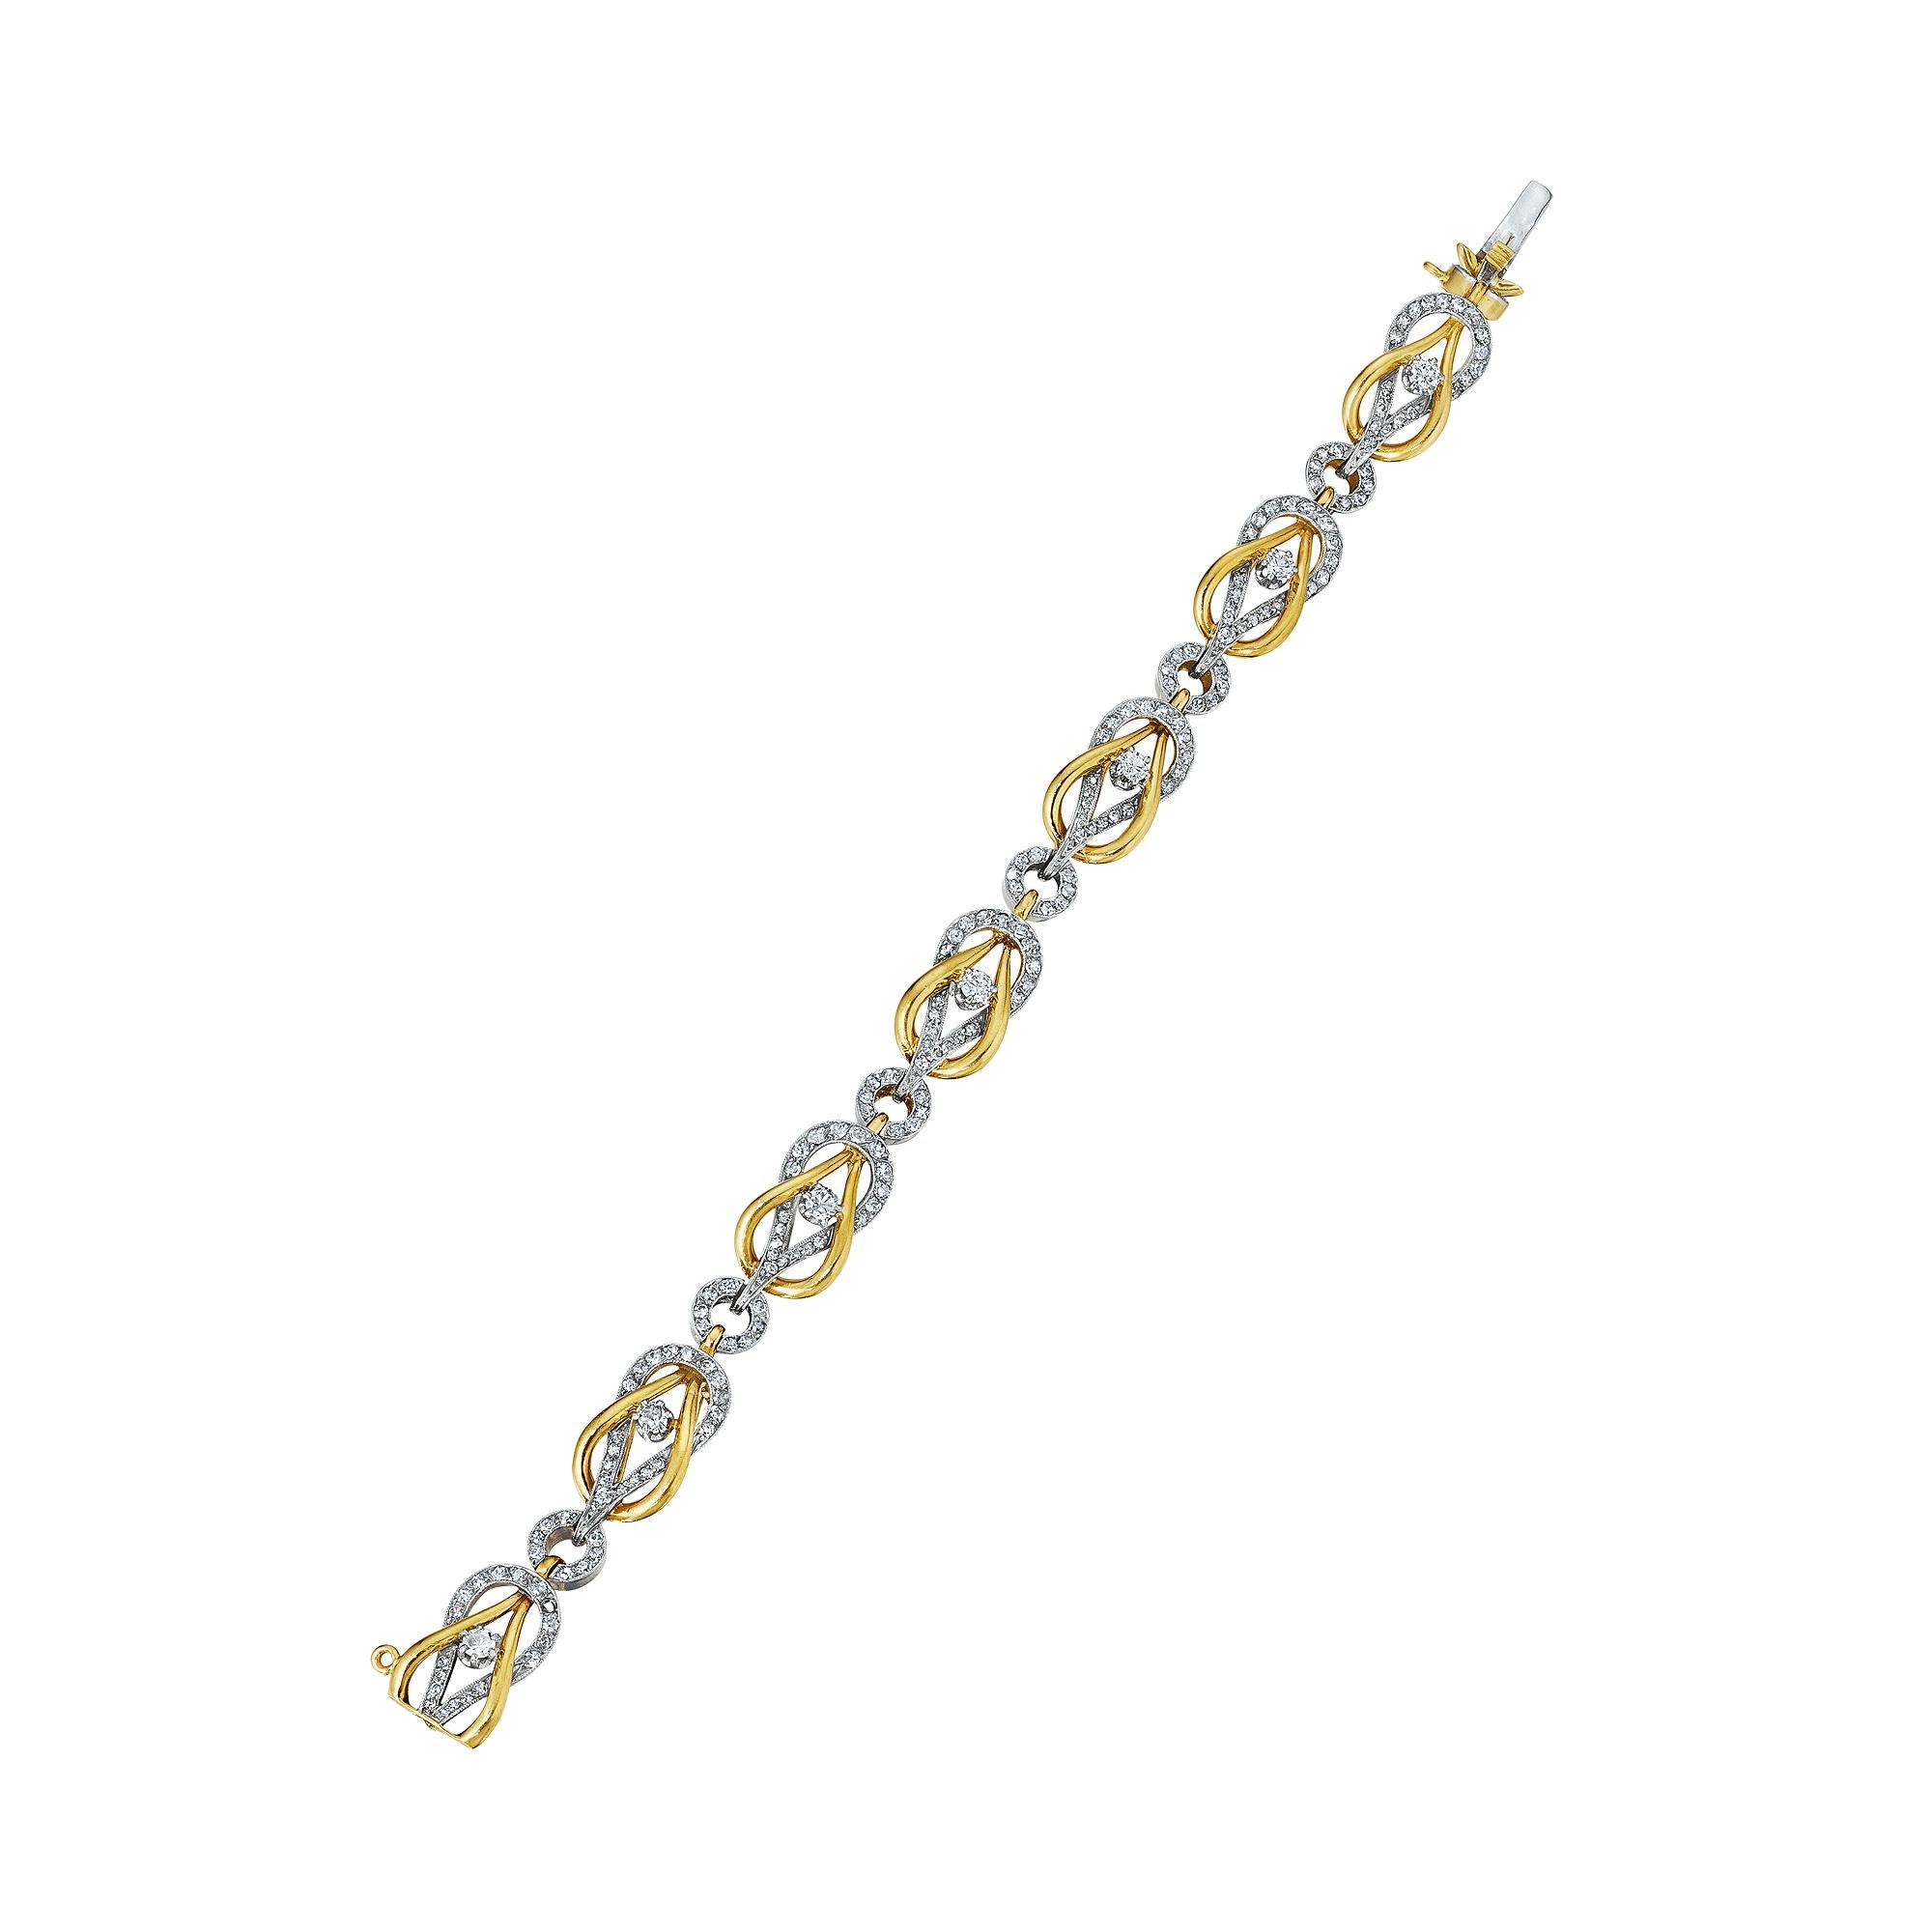 Set sail with this extraordinary French Art Nouveau diamond, 18 karat yellow gold, and platinum nautical square knot link bracelet.  With a total of 1.20 carats of vintage round cut diamonds and a unique nautical rope link design, this one-of-a-kind